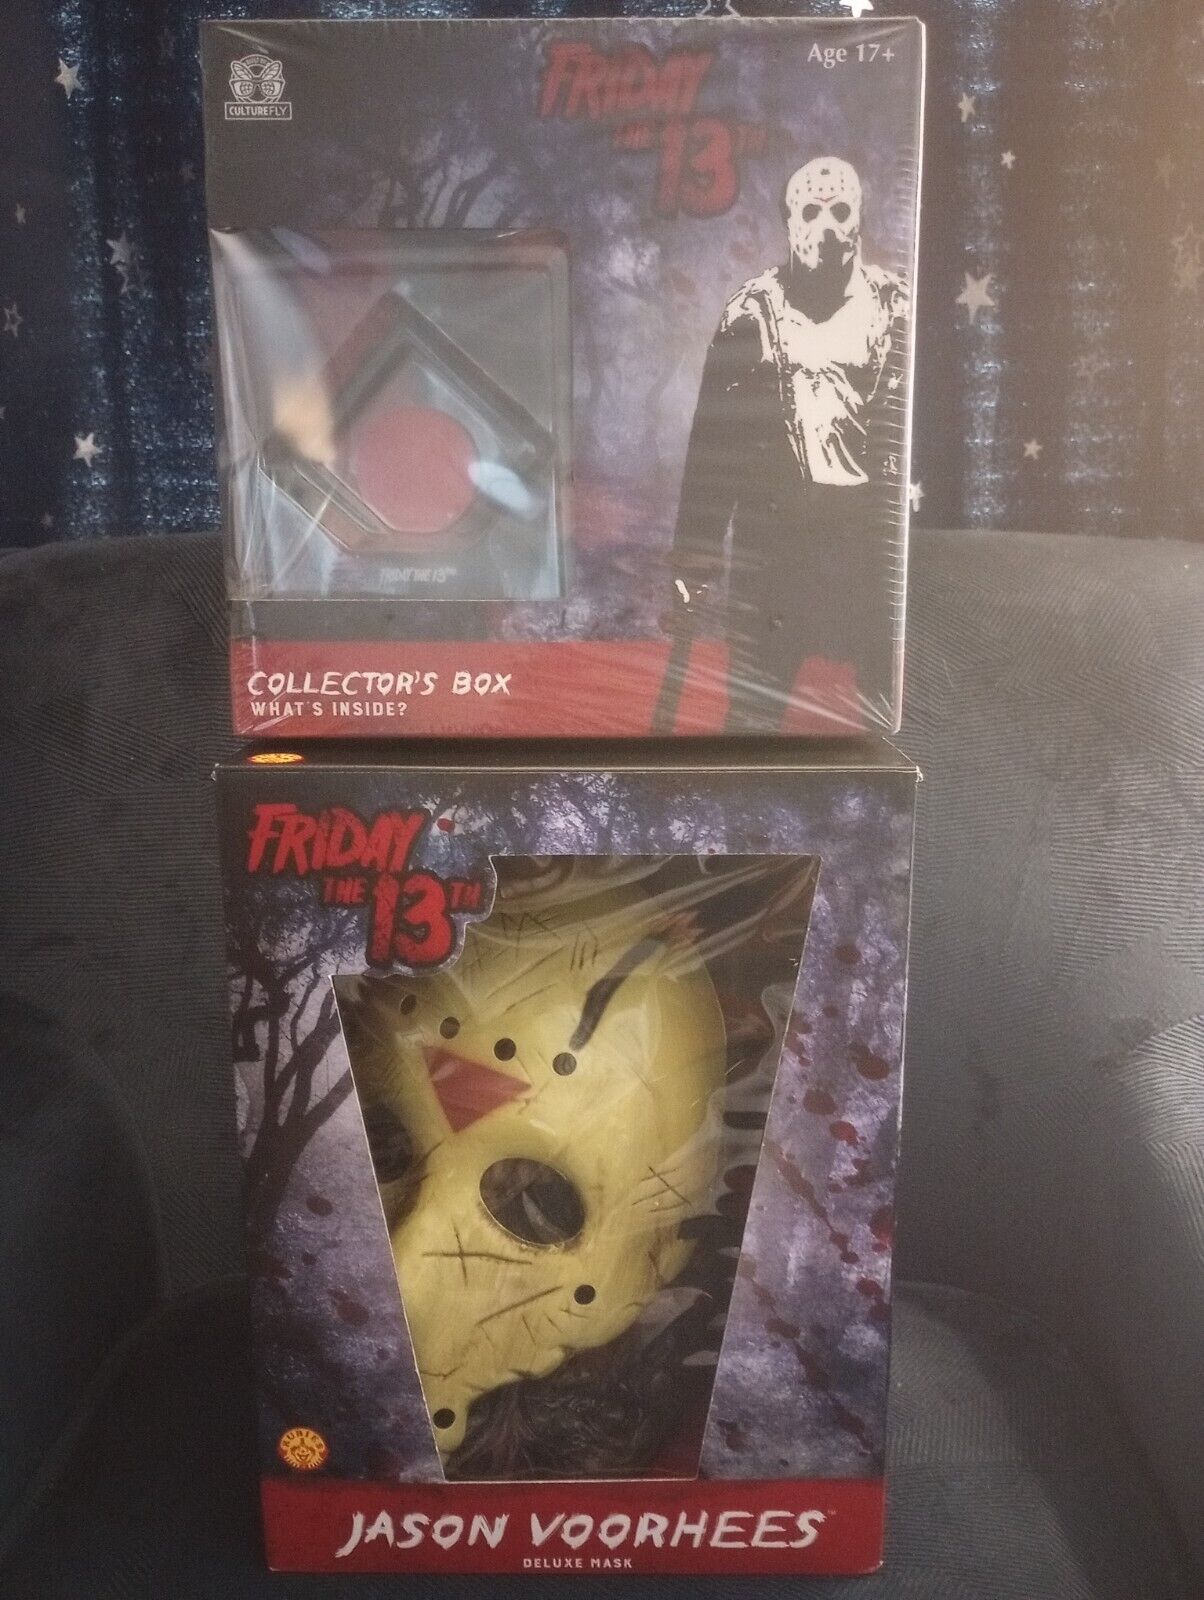 FRIDAY THE 13TH JASON VOORHEES Deluxe Mask + Collector's Box Rubie's 4181